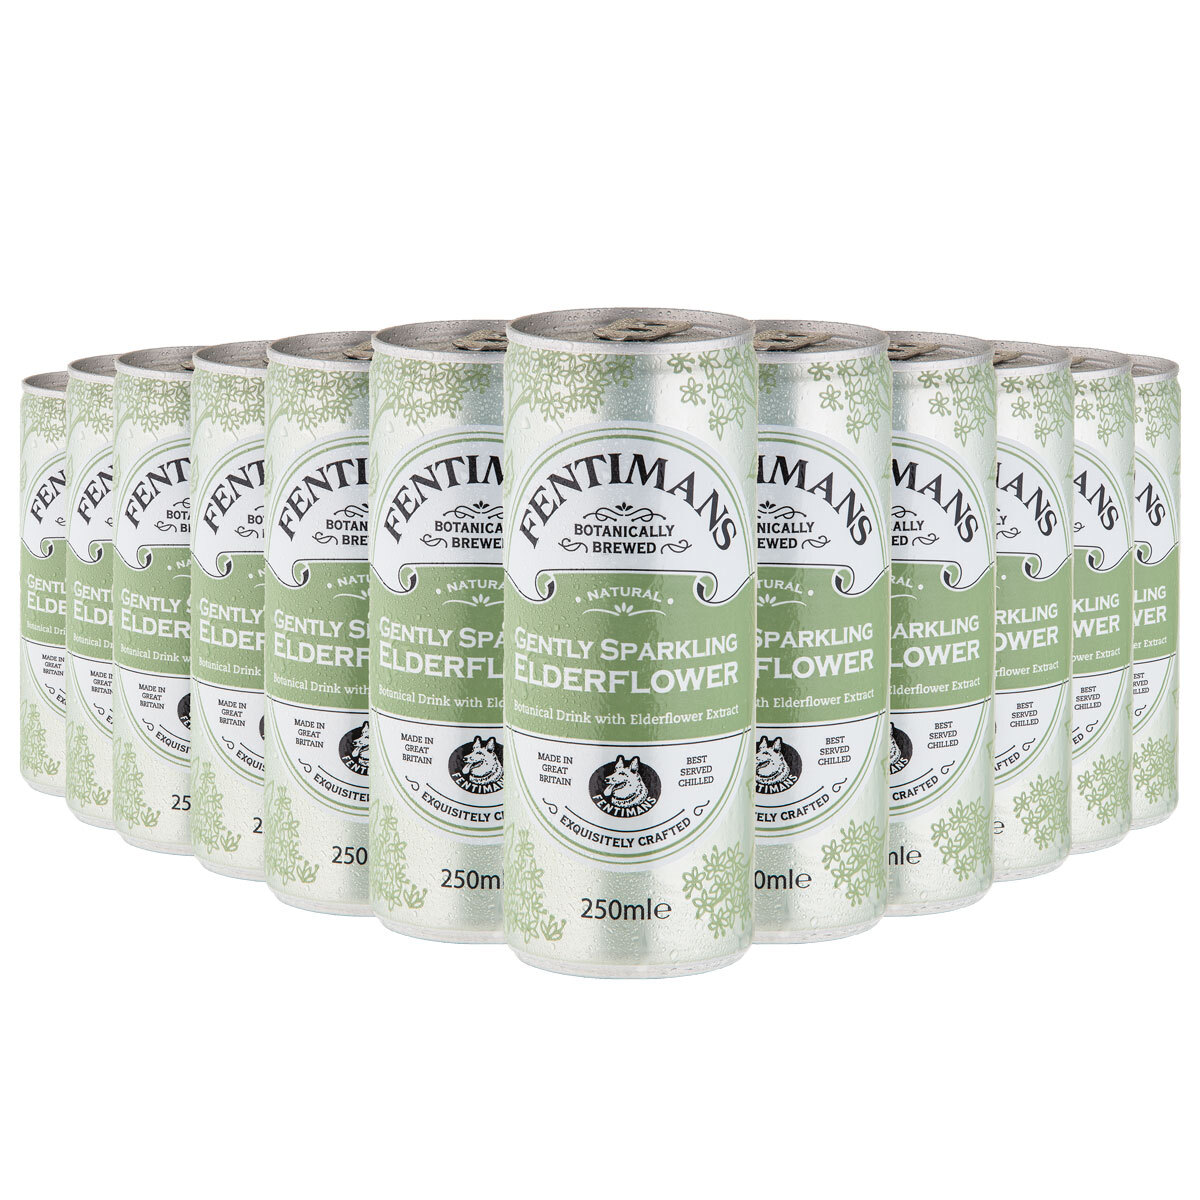 12 cans of fentimans eldeflower tonic water